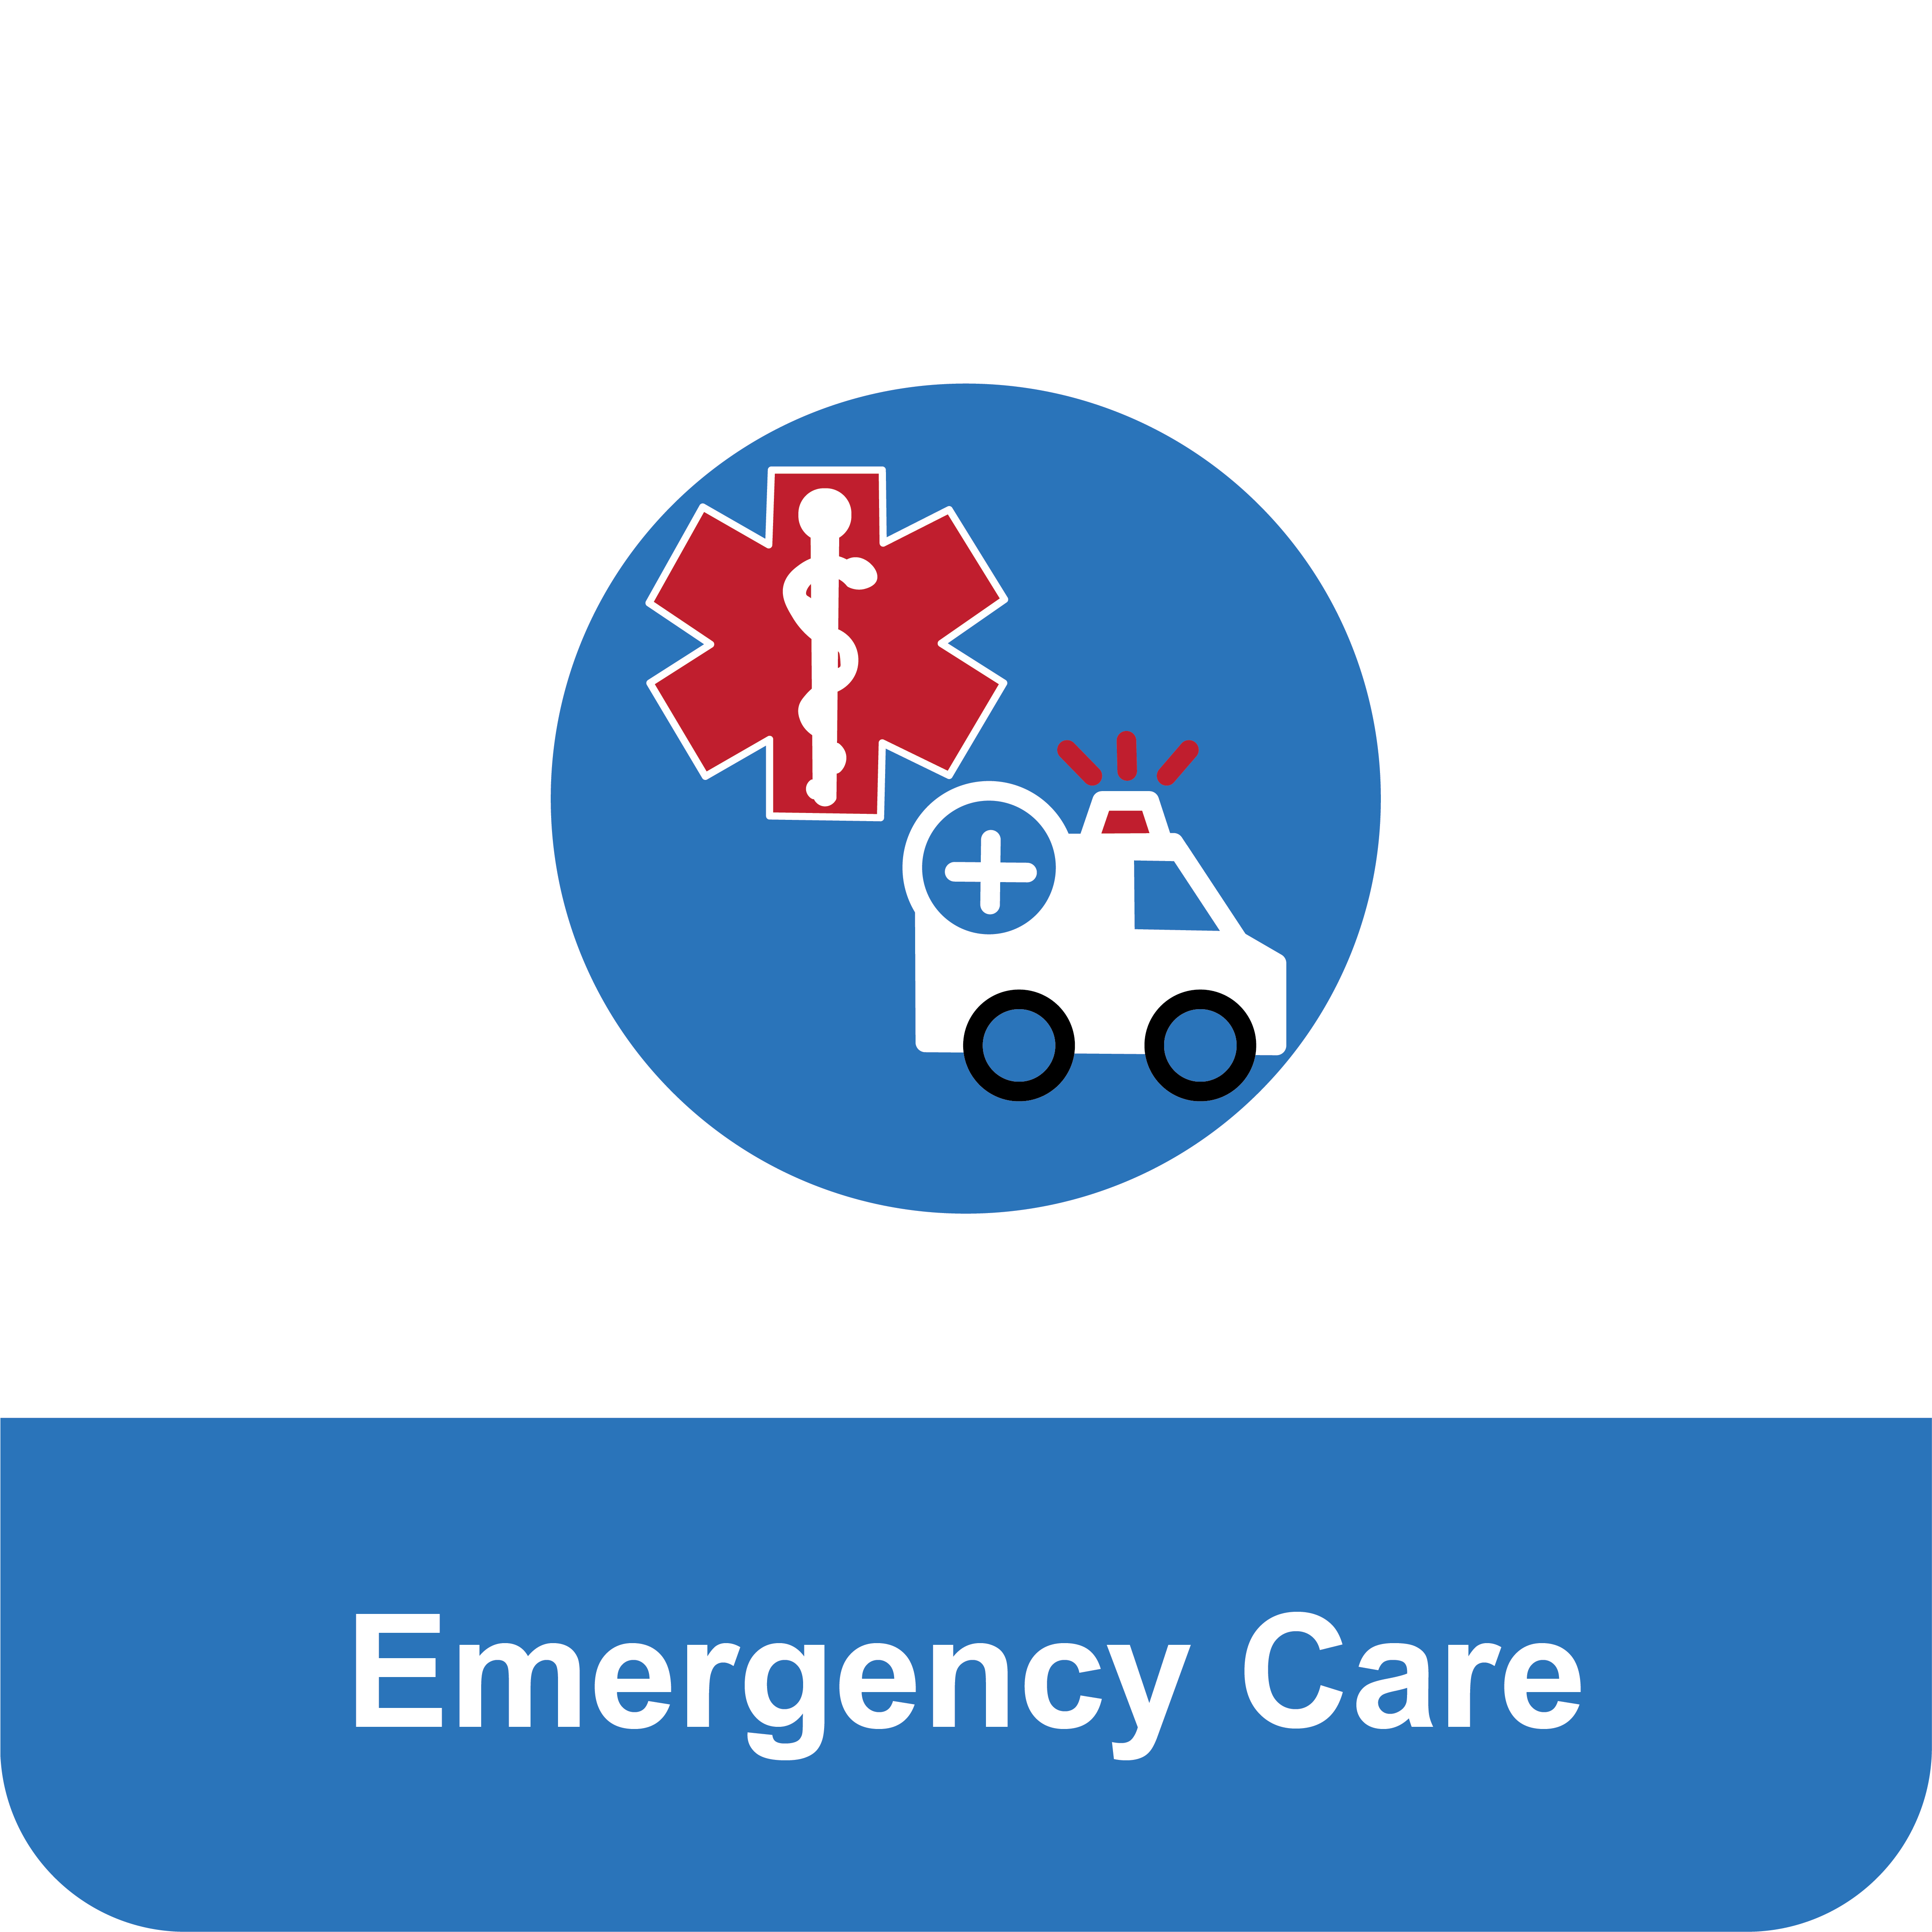 Tile that reads "Emergency Care" under an icon of an ambulance.